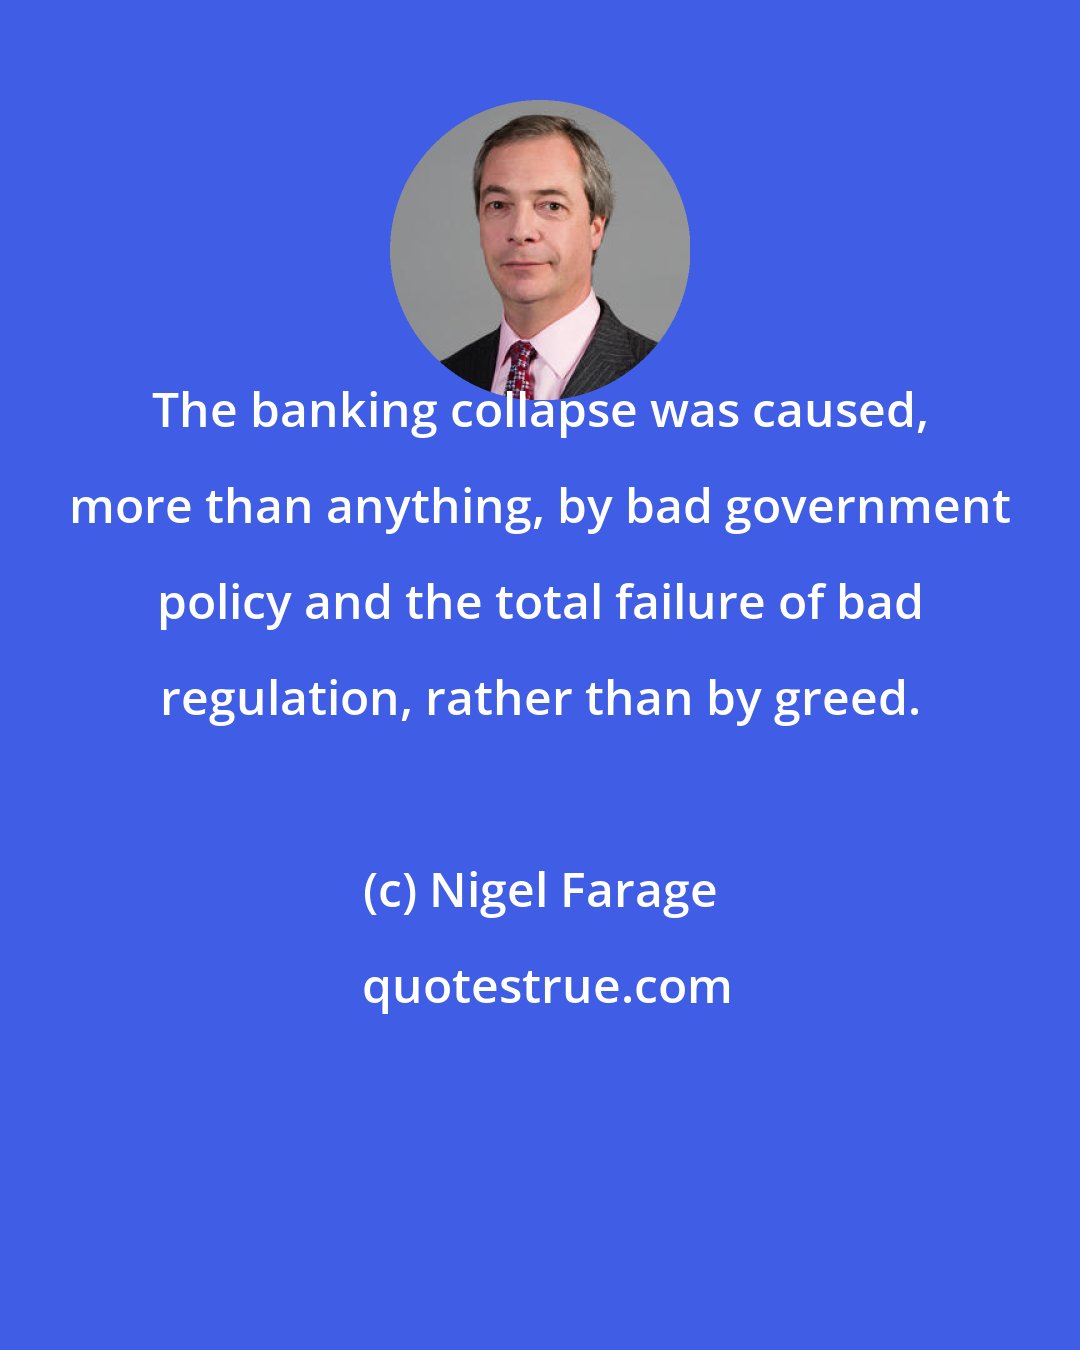 Nigel Farage: The banking collapse was caused, more than anything, by bad government policy and the total failure of bad regulation, rather than by greed.